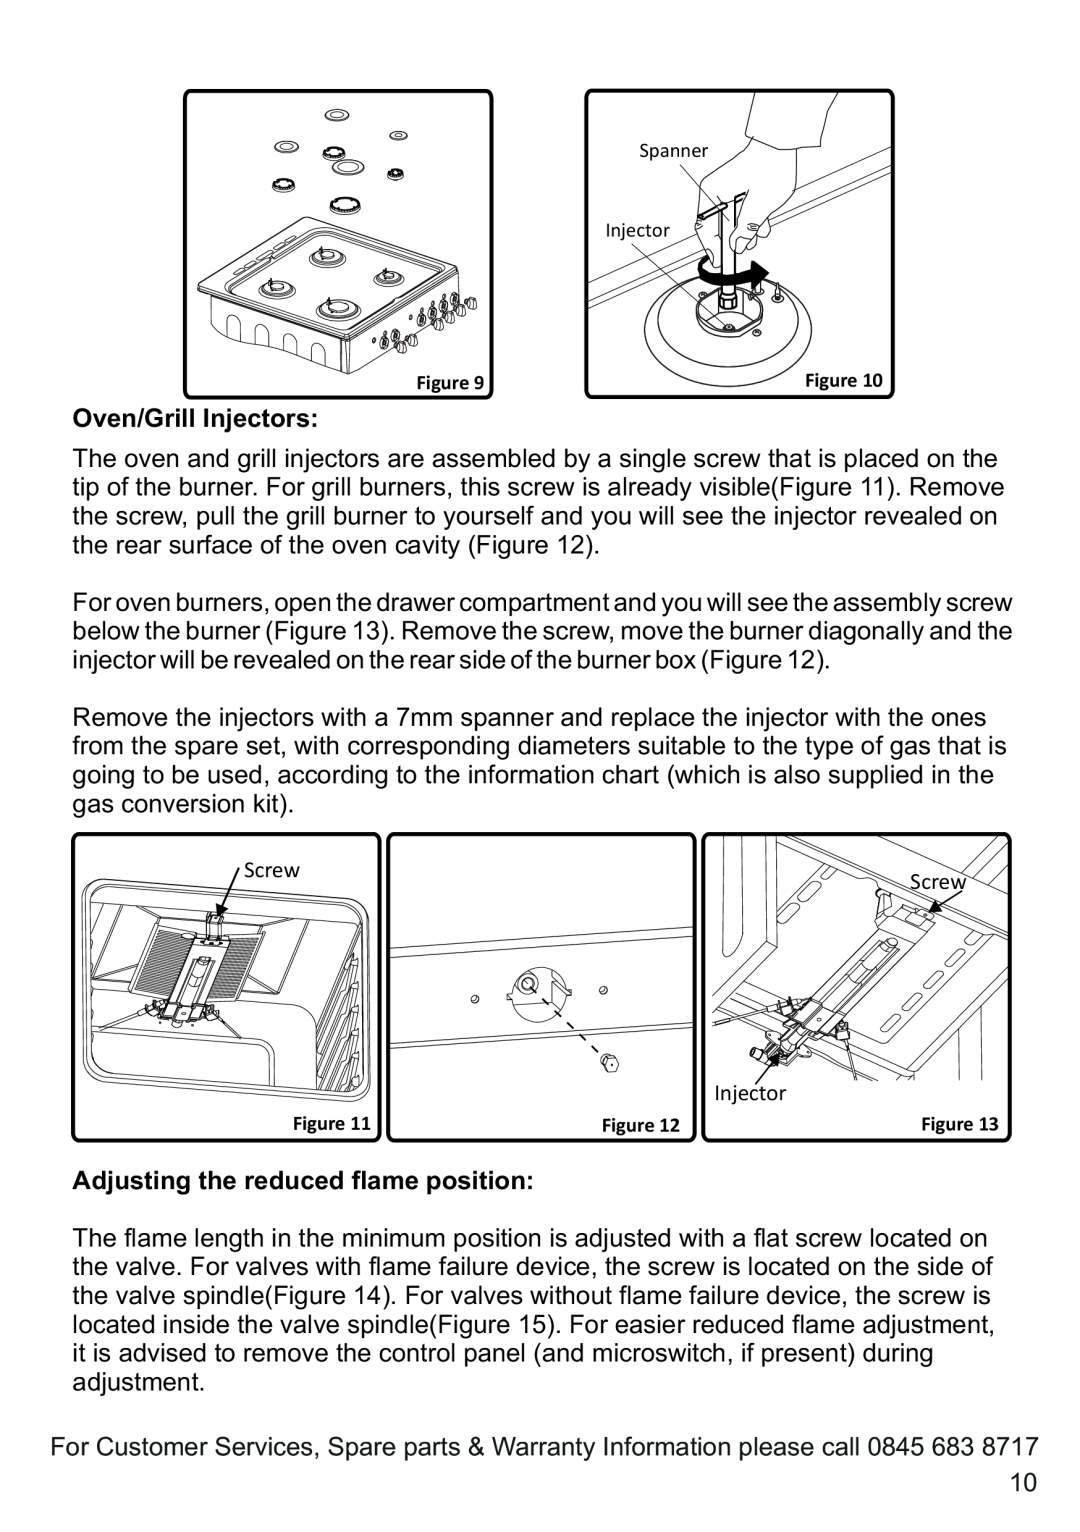 Russell Hobbs RHGC1 instruction manual Oven/Grill Injectors, Adjusting the reduced flame position 